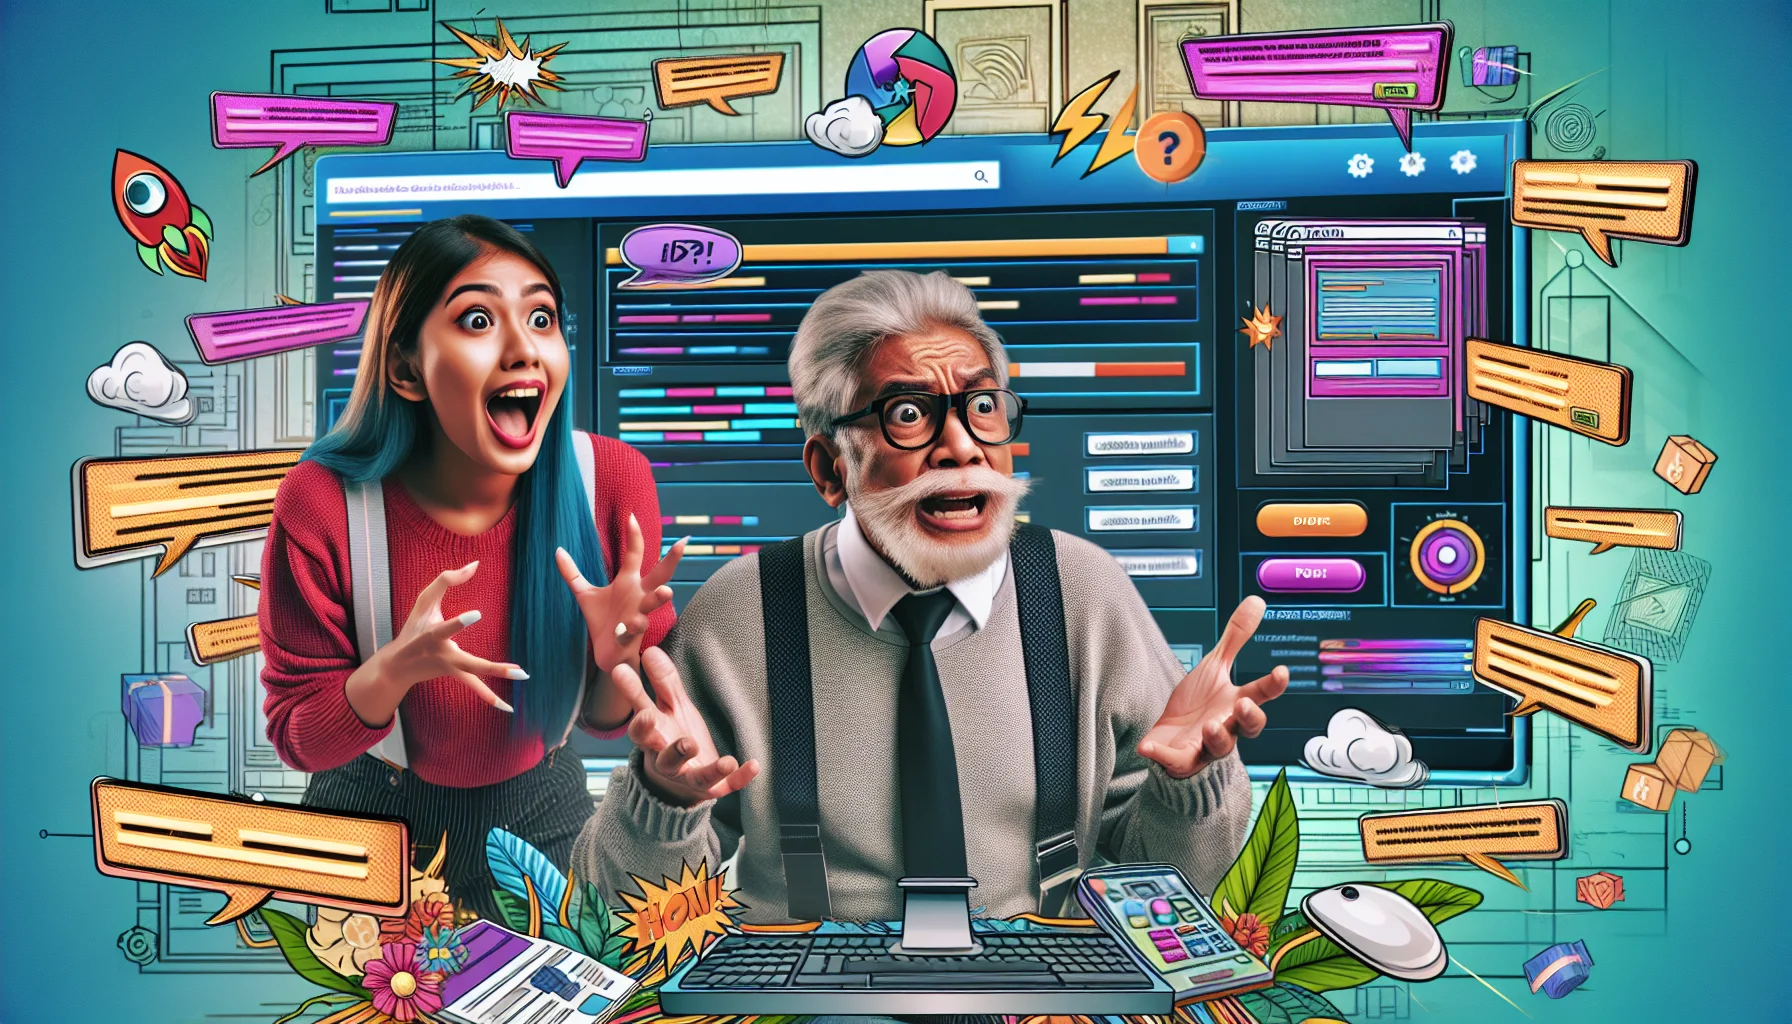 Create a lively and humorous scene featuring a young South Asian female coder and an elderly Hispanic male struggling to change a generic website template. Showcase their expressions of excitement and confusion as they navigate through the virtual dashboard. The backdrop is flooded with on-screen instructions, vivid website designs, and flamboyant digital graphics. Intensify the drama with quirky dialogues popping up in comic-strip style speech bubbles. Also, include subtle elements that endorse web hosting services, such as a hovering cloud storage icon or an optimistic speedometer showing high internet speed.